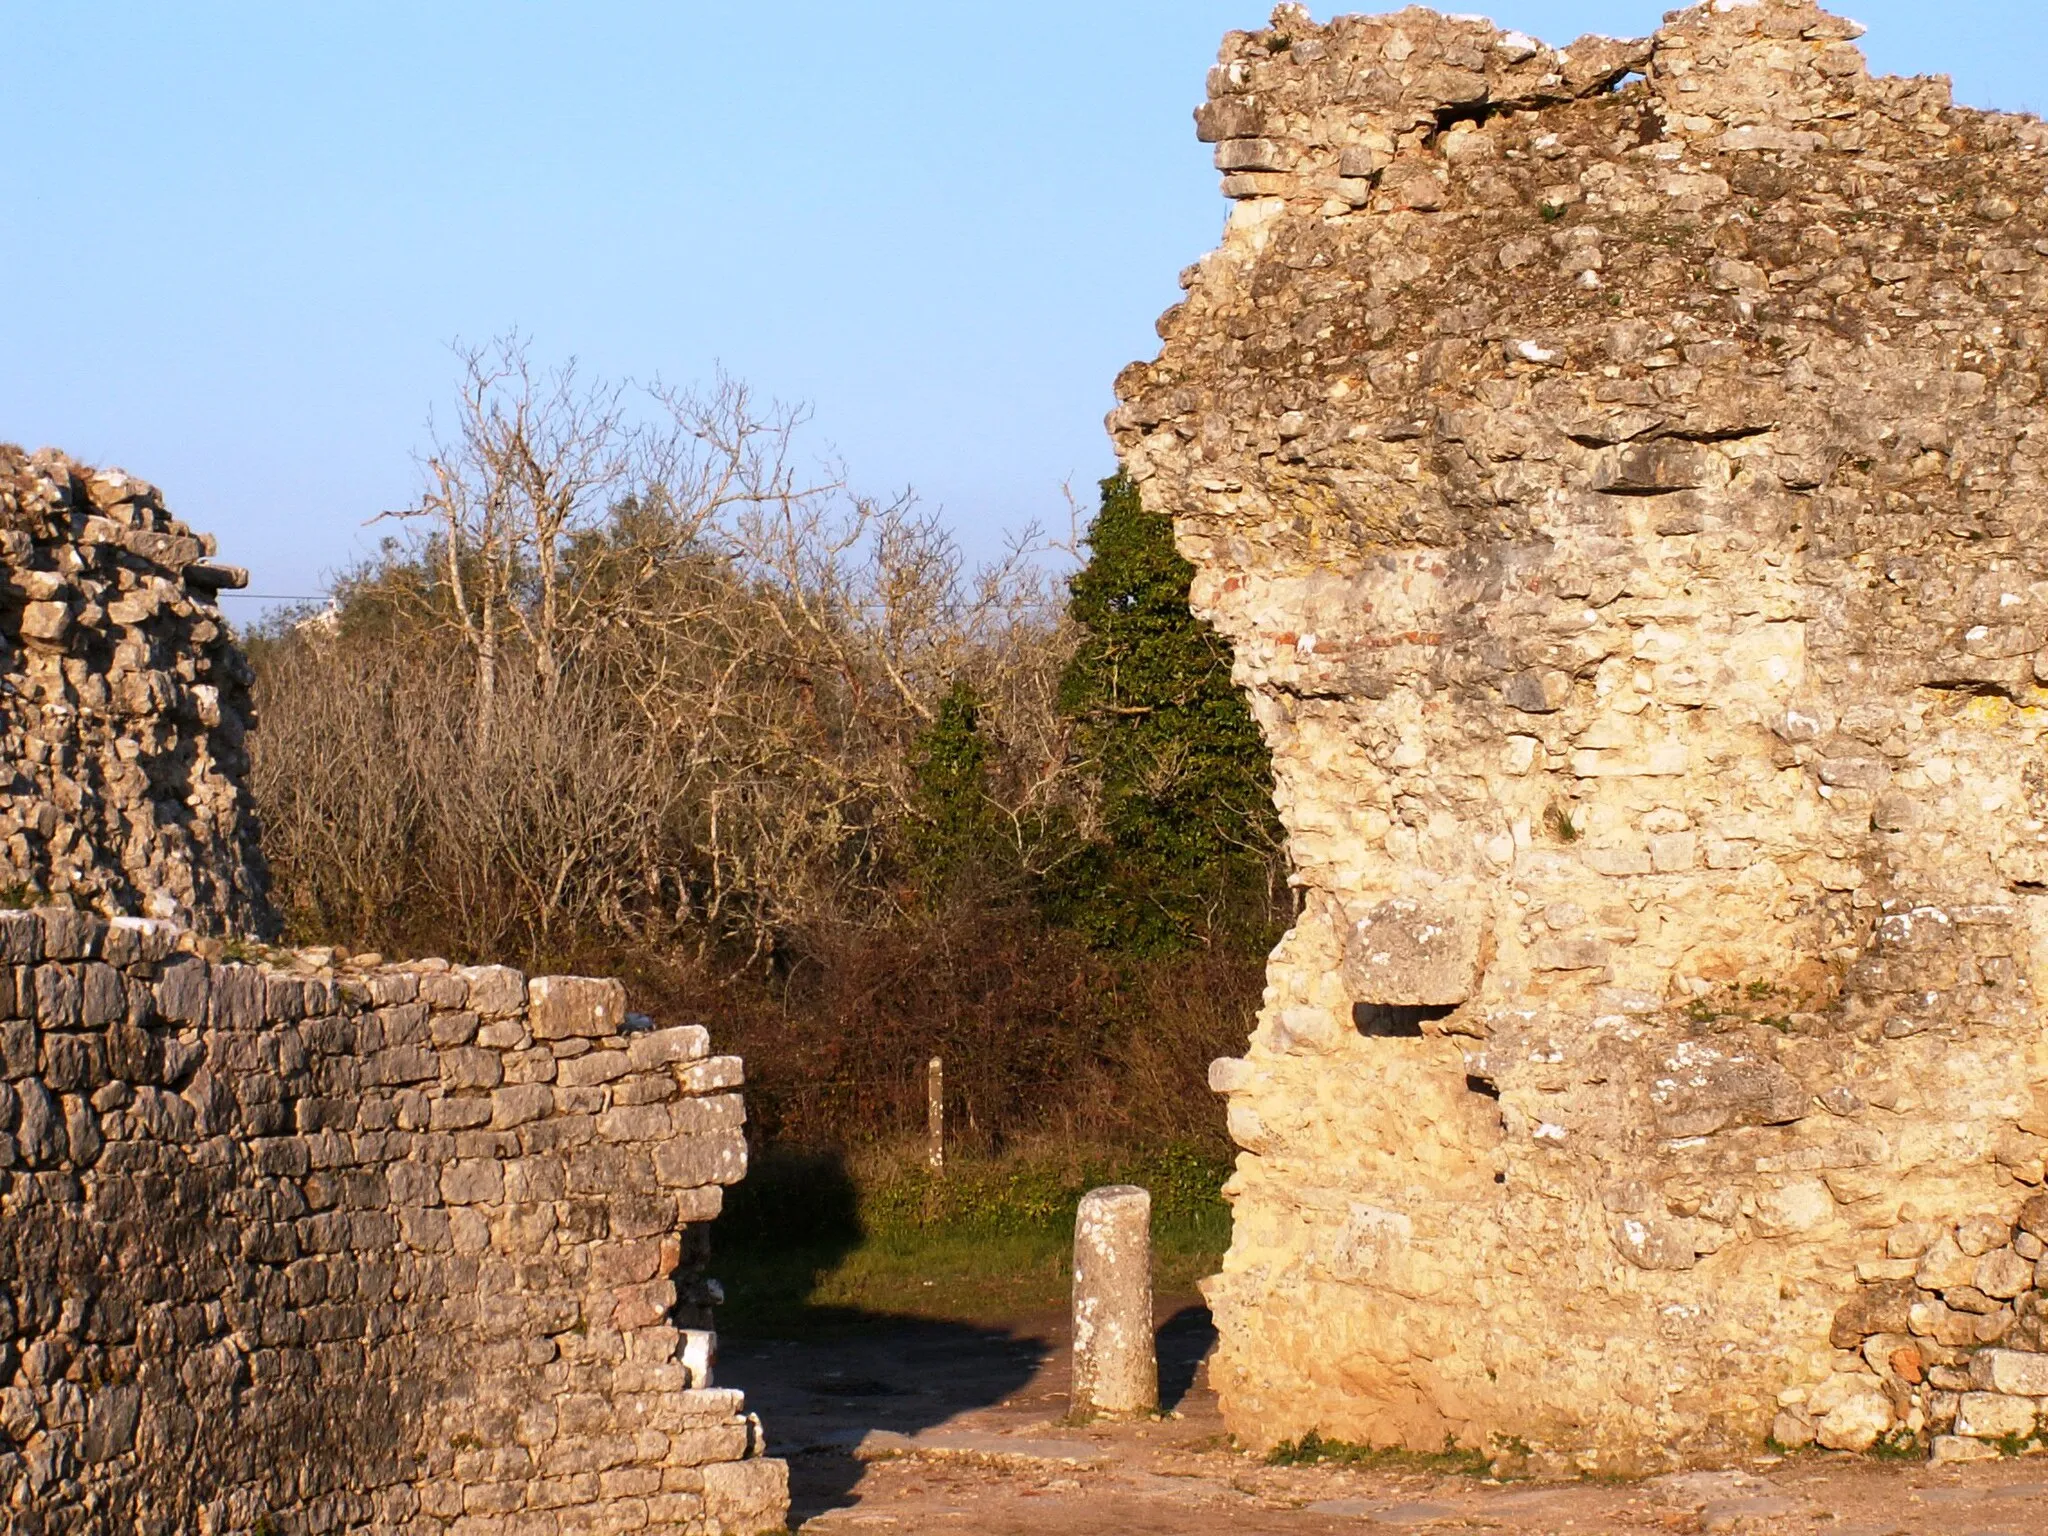 Photo showing: Ruins of a roman gate in Conímbriga.
Conímbriga is one of the largest Roman settlements in Portugal, and is classified as a National Monument. Conímbriga lies 16 km from Coimbra (the Roman Aeminium) and less than 2 km from Condeixa-a-Nova.
The name Conimbriga derives from an early, possibly pre-Indo-European element meaning "rocky height or outcrop" and the Celtic briga, signifying a defended place. Others think that the element coni may be related to the Conii people.
When the Romans arrived, in the first half of the 2nd century BC, Conímbriga was a flourishing village. Thanks to the peace established in Lusitania a quick Romanisation of the indigenous population took place and Conímbriga became a prosperous town. Judging by the capacity of the amphitheater, the city had an estimated population of 10600.
Following the deep political and administrative crisis of the Empire, Conímbriga suffered the consequences of the barbaric invasions. In 465 and 468, Sueves captured and partially plundered the town already abandoned by part of its population, that fled to the nearby town of Aeminium.
The city walls are largely intact, and the mosaic floors and foundations of many houses and public buildings remain.

Source: Wikipedia